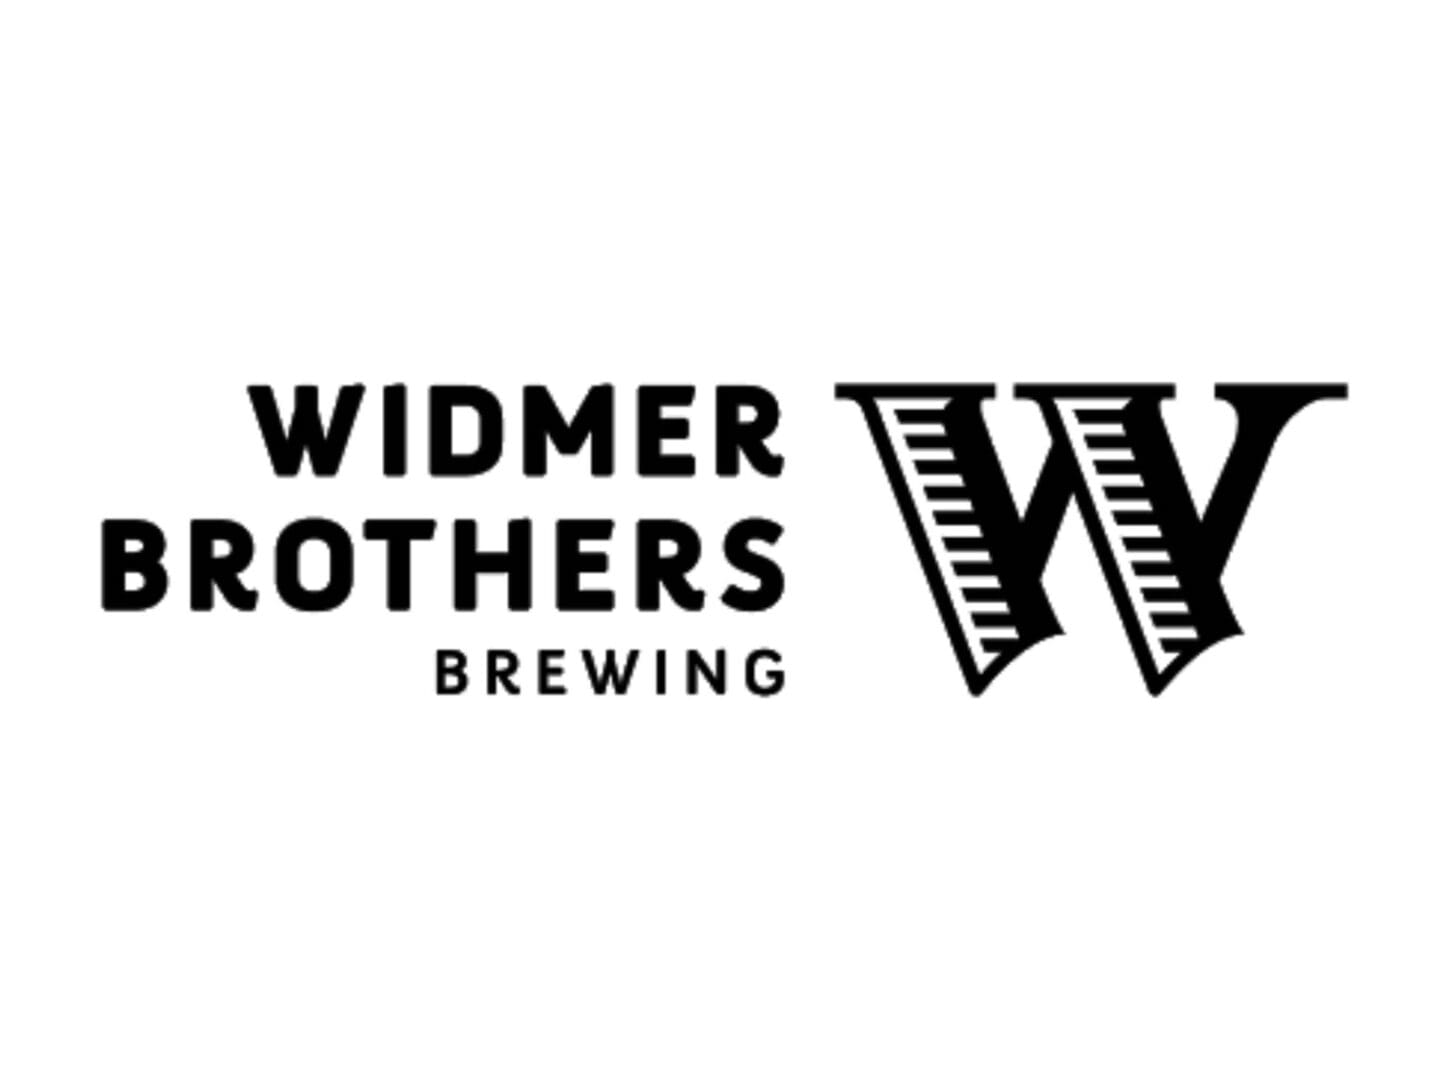 Widmer brothers brewing